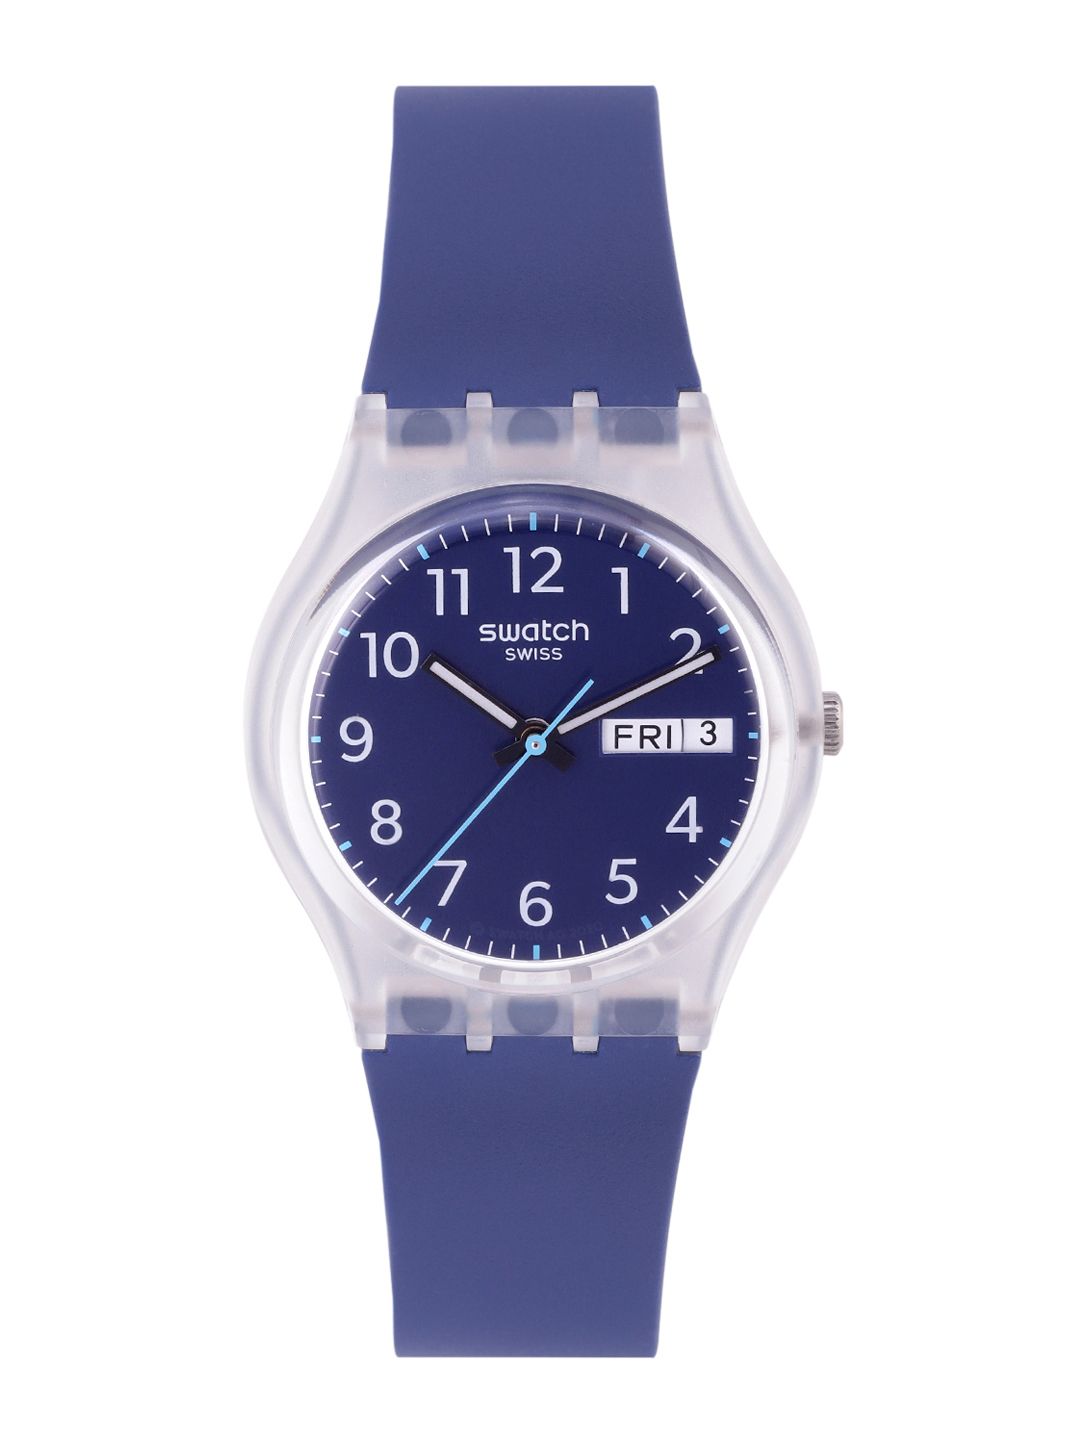 Swatch Unisex Blue Shock-Resistant Water Resistant Analogue Watch GE725 Price in India